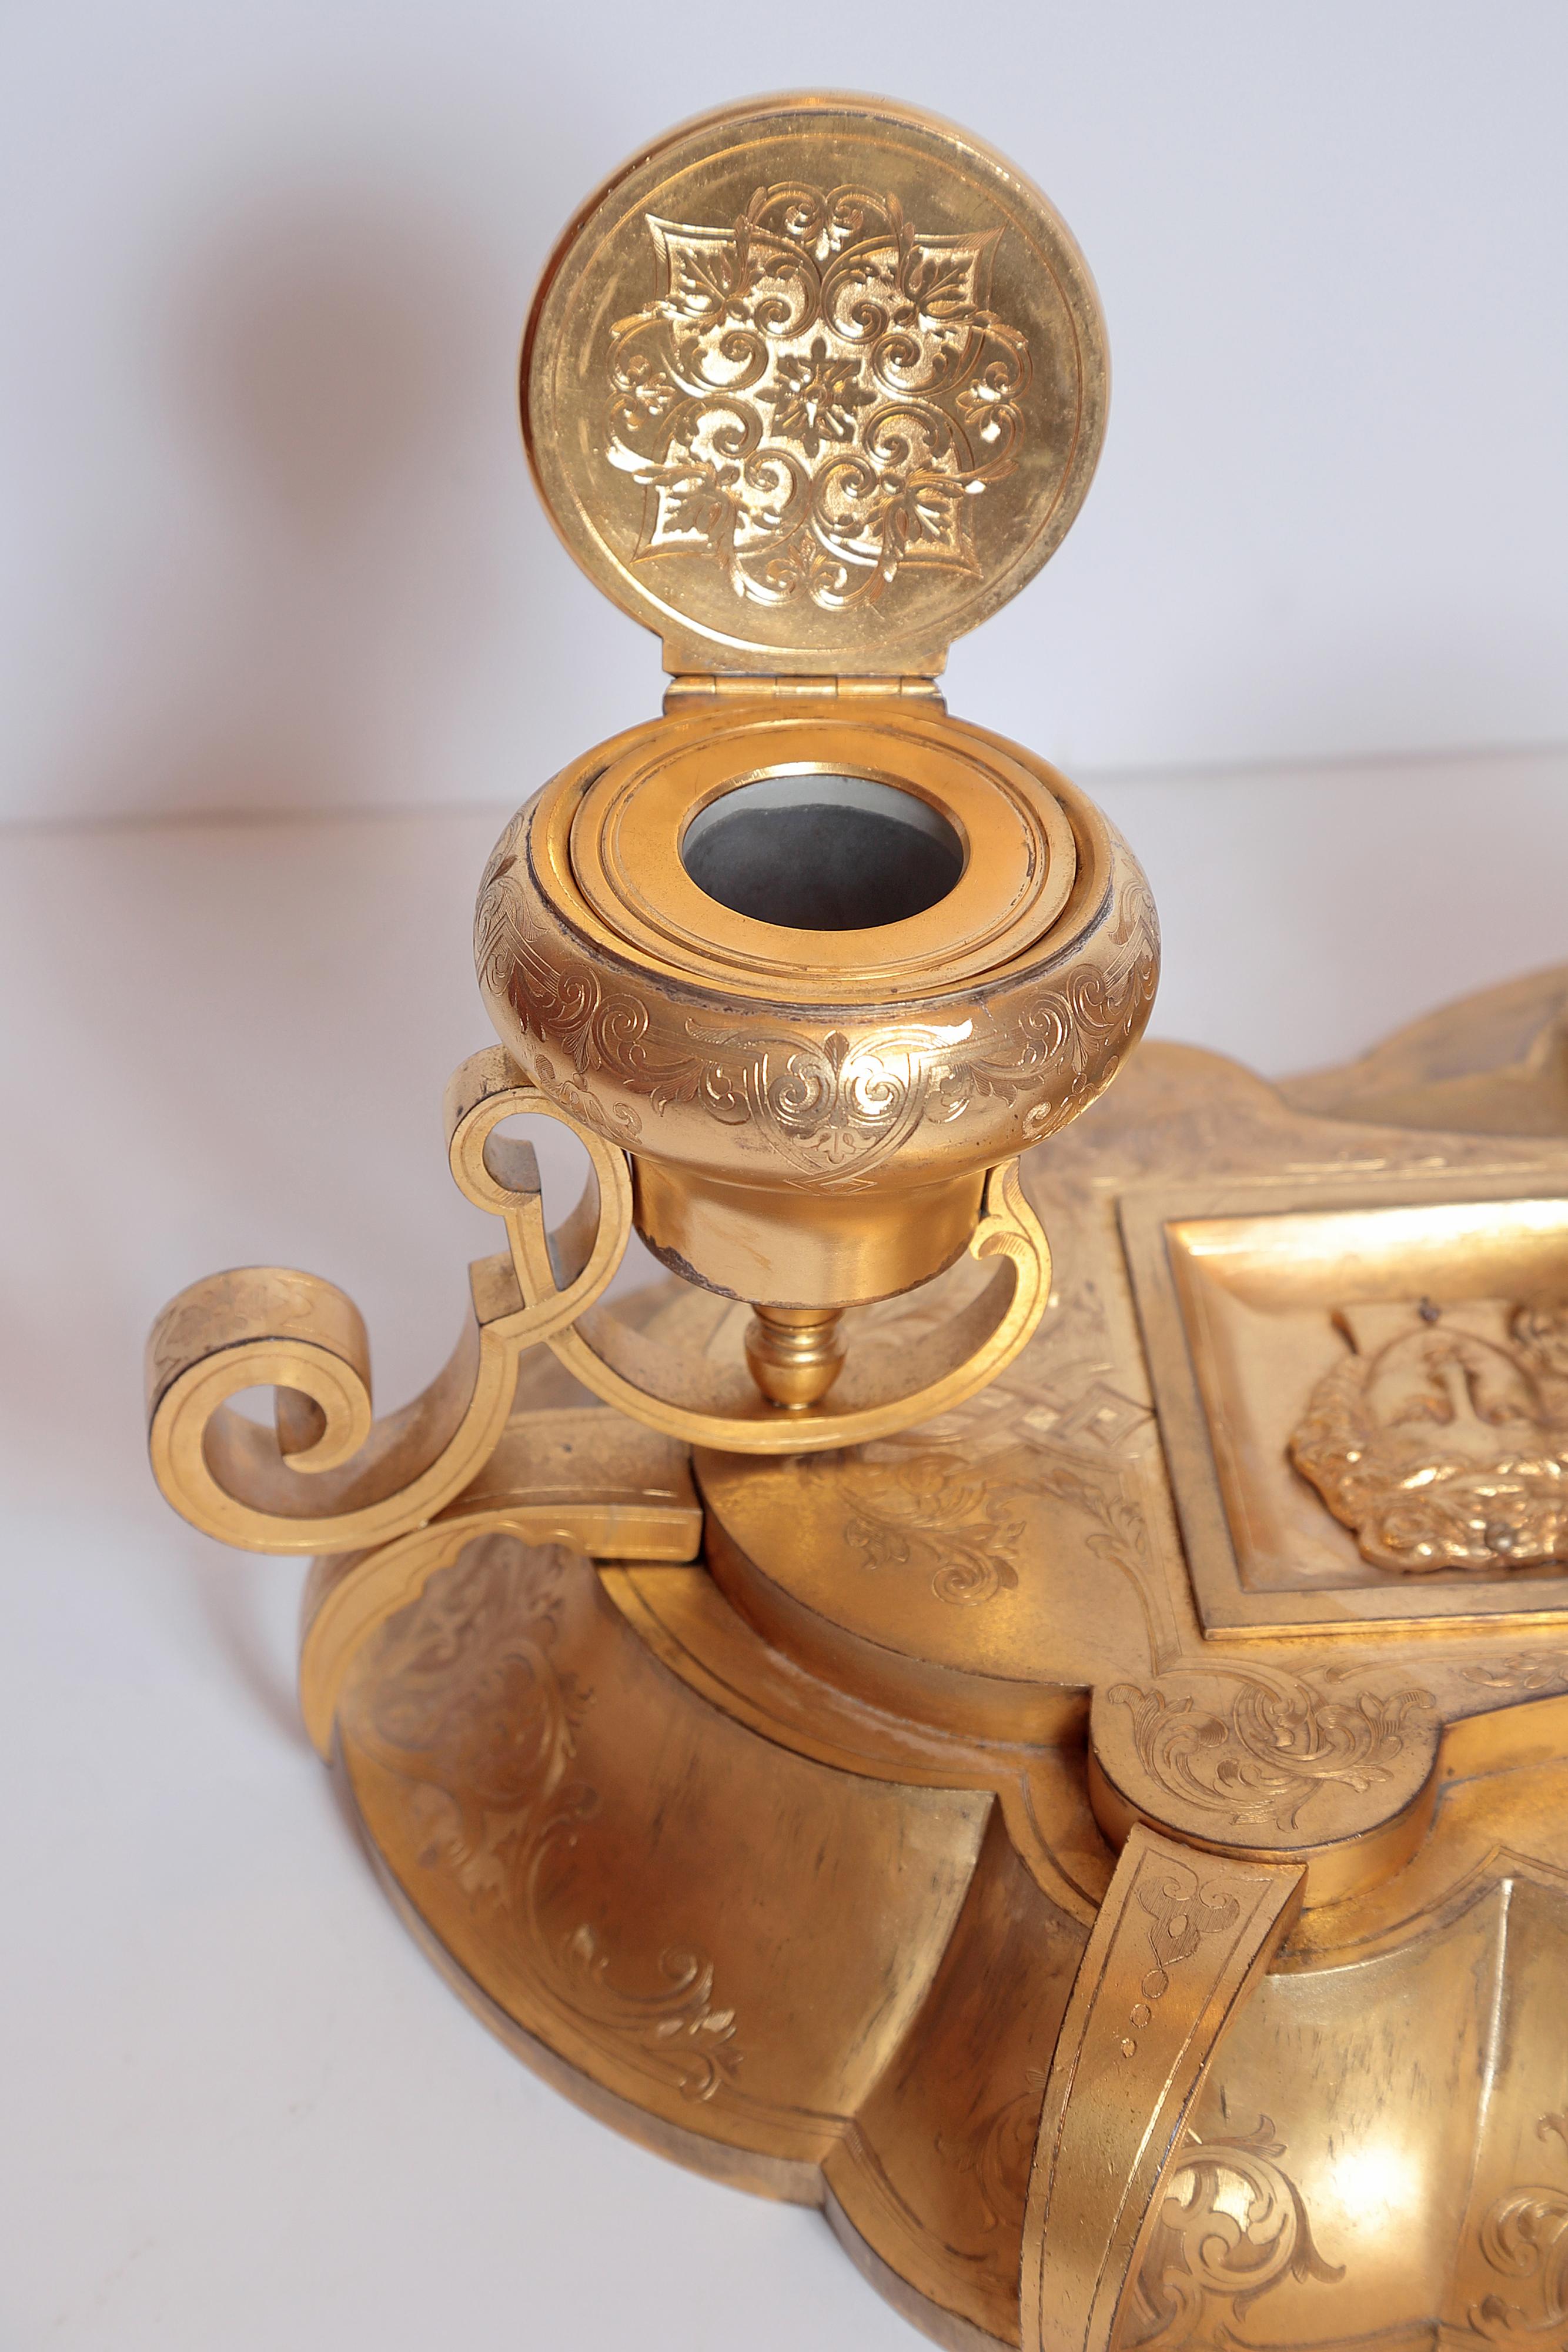 Belle Époque Gilt Bronze Inkwell with Sevres Porcelain Plaque's in Robin’s Egg In Good Condition For Sale In Dallas, TX